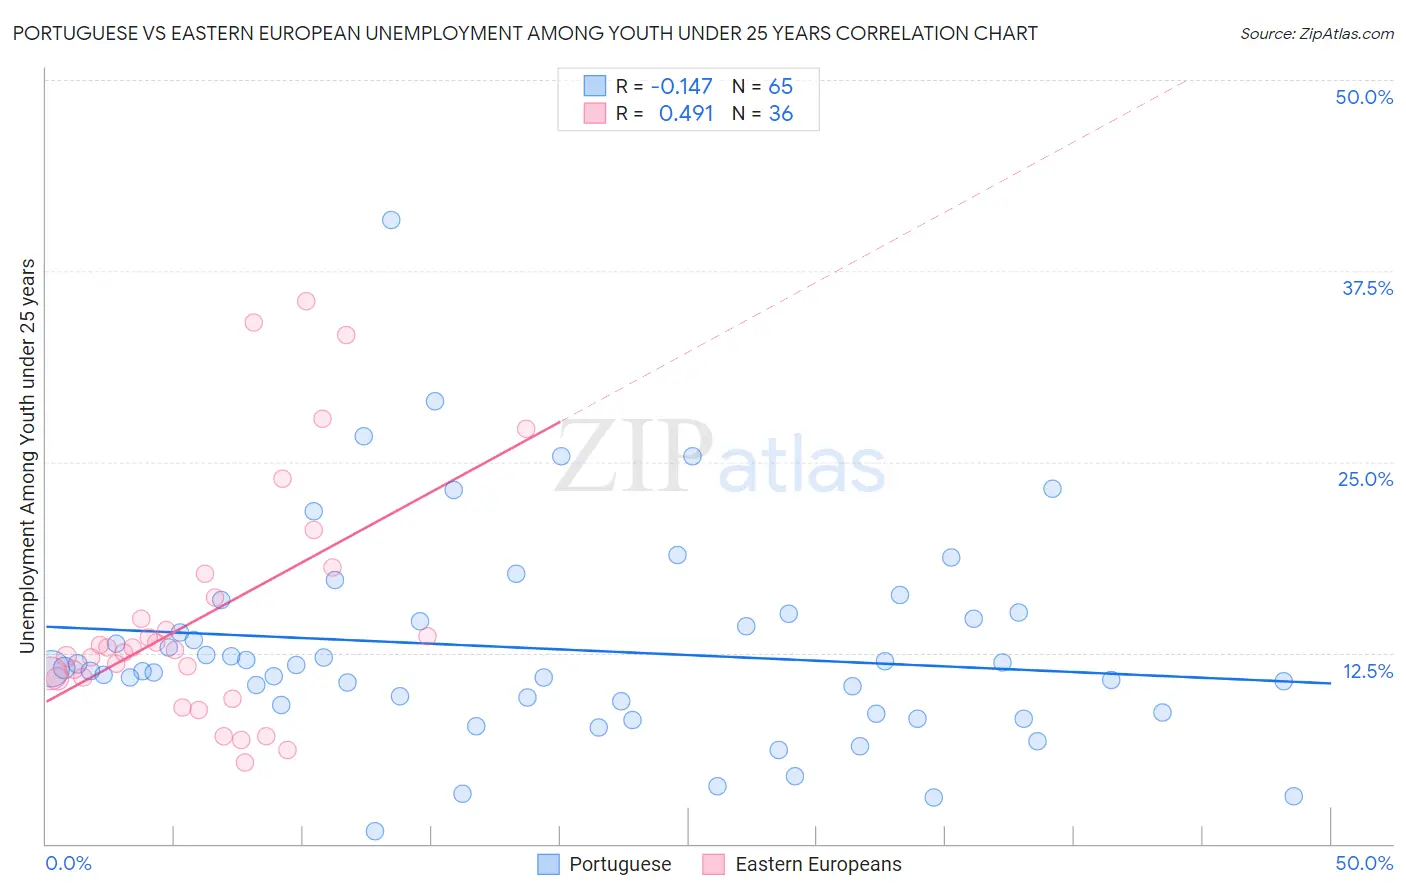 Portuguese vs Eastern European Unemployment Among Youth under 25 years